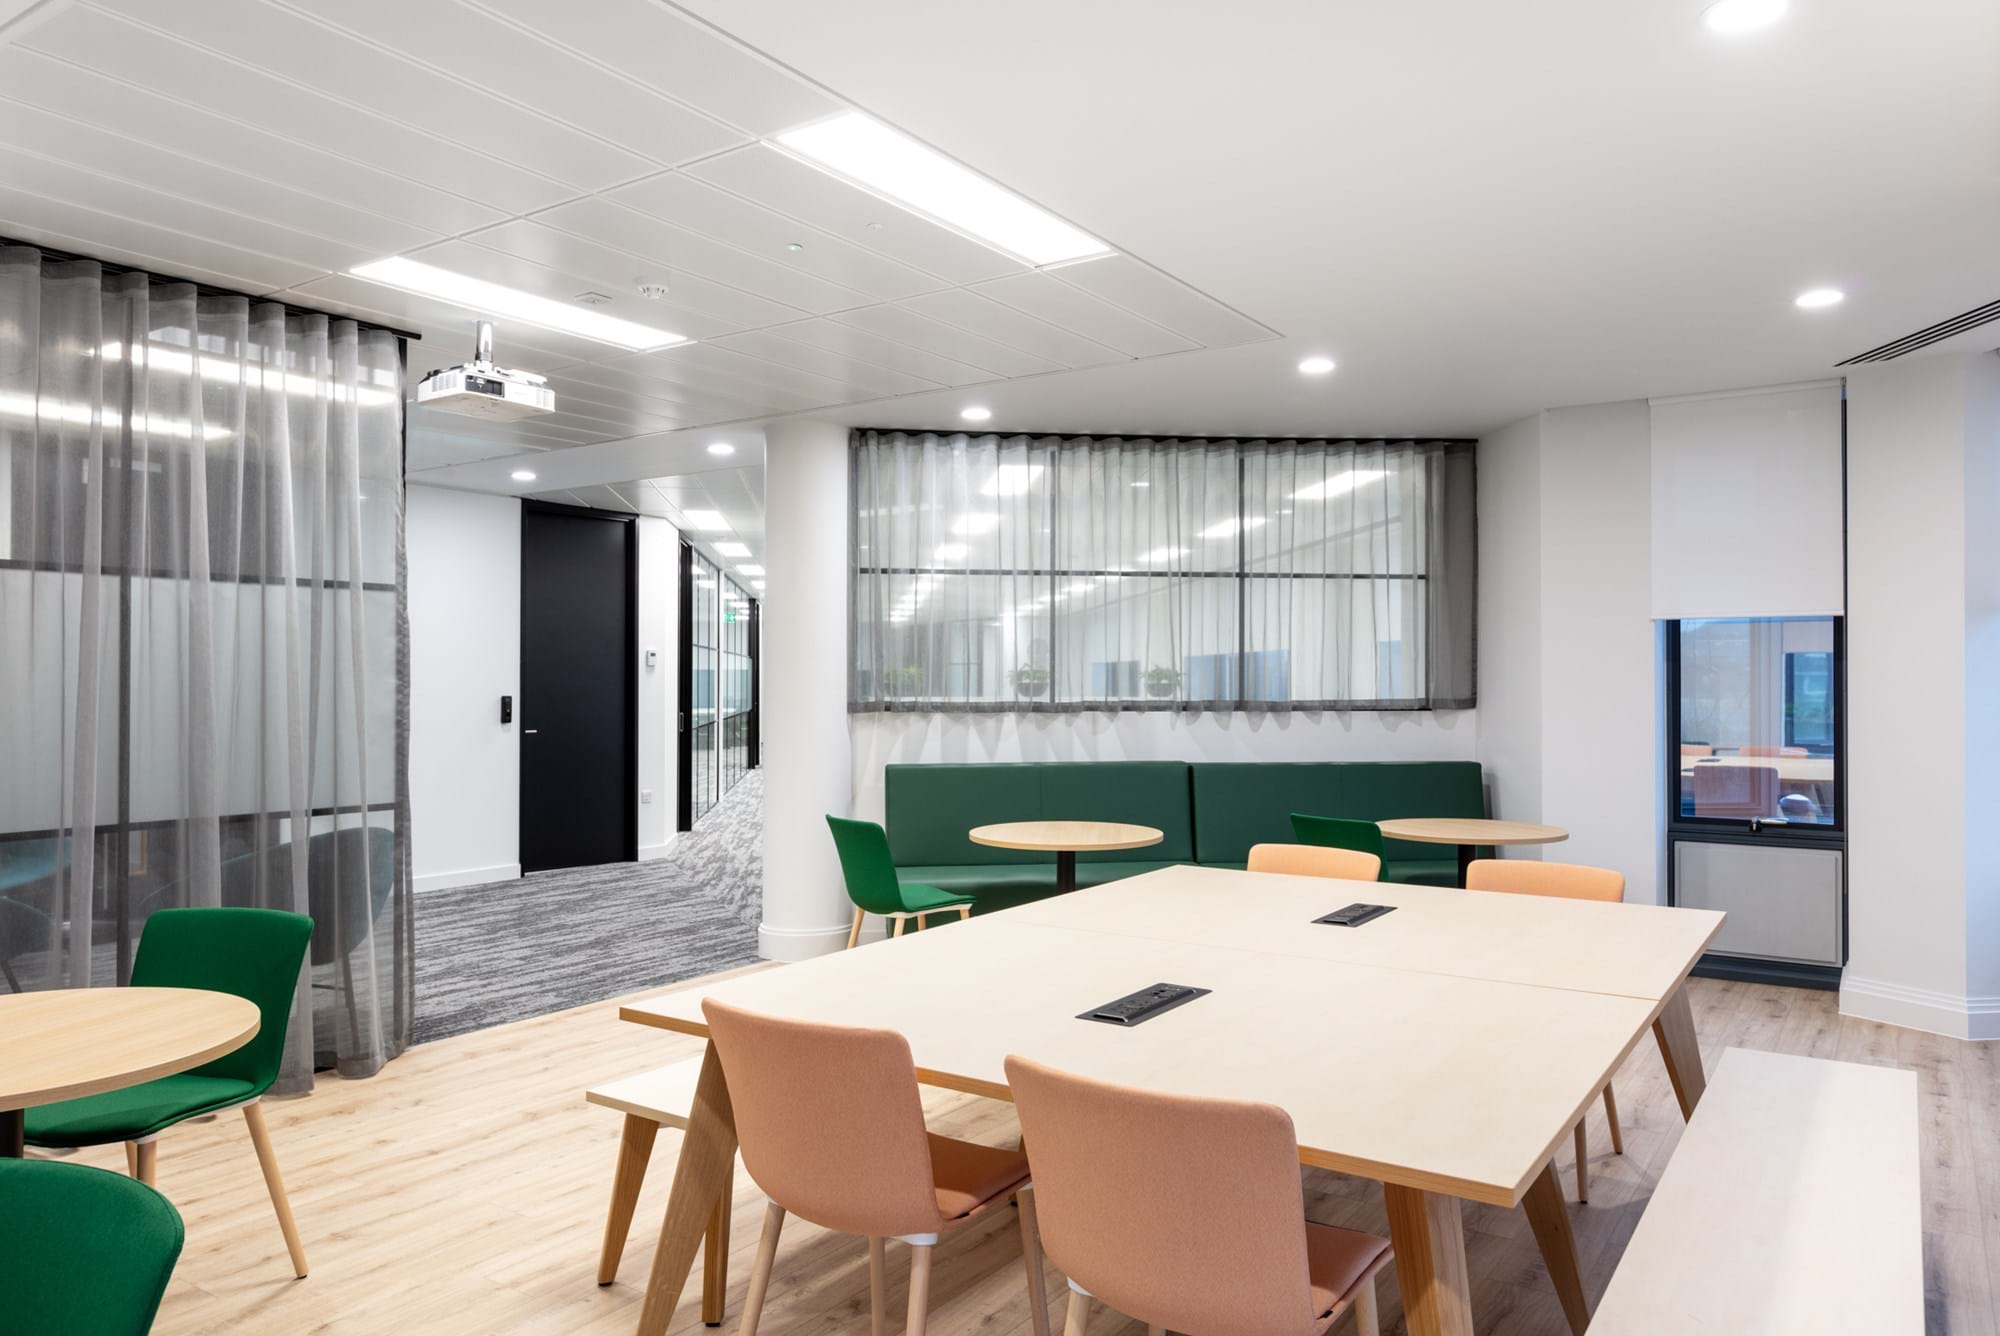 Modus Workspace office design, fit out and refurbishment - Pivot - Guildford - Pivot_Guildford_161220-62.jpg